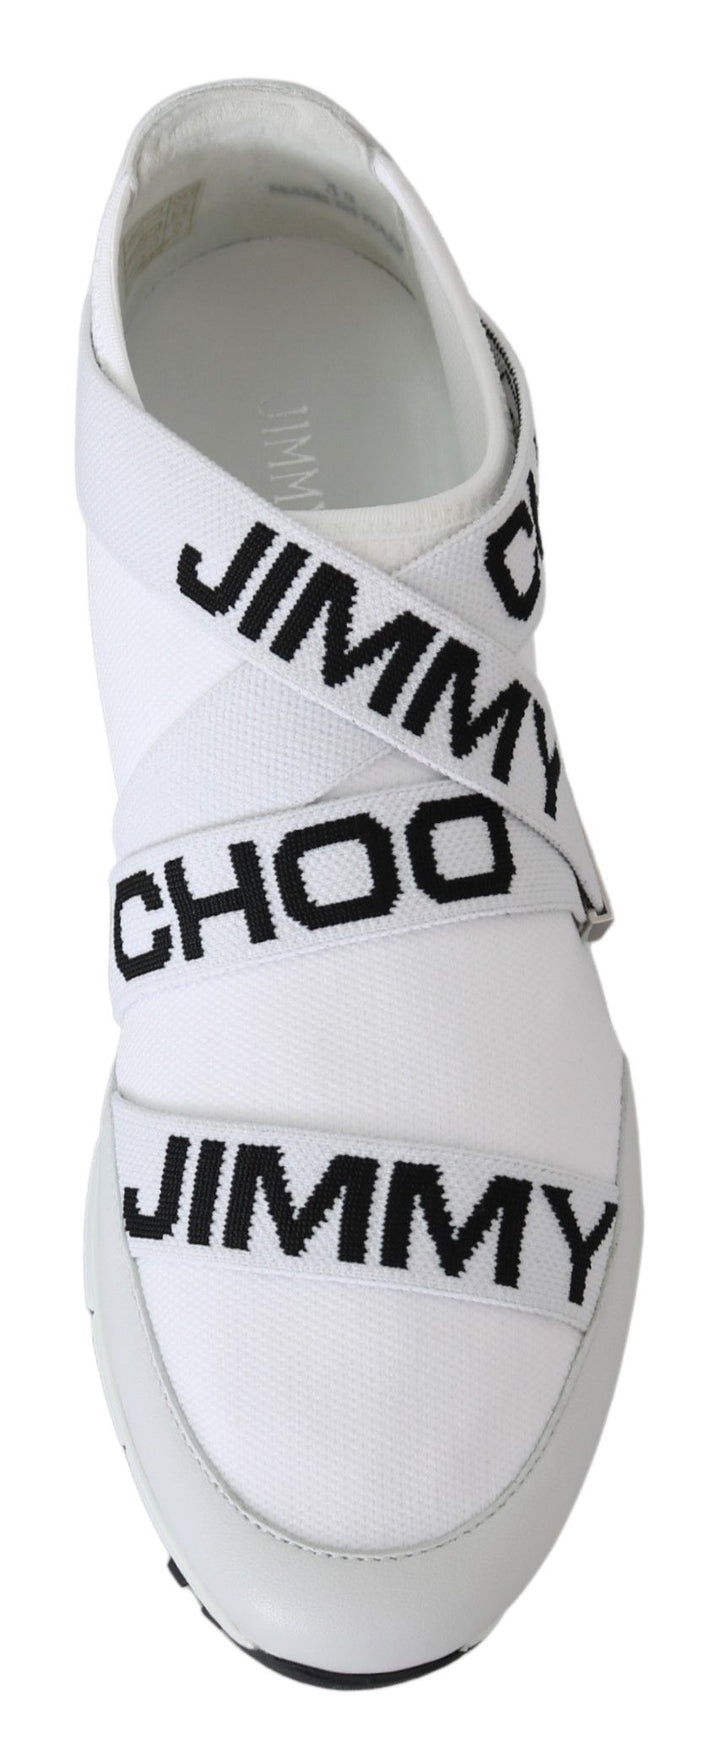 Jimmy Choo Chic White and Blue Nappa Knit Sneakers